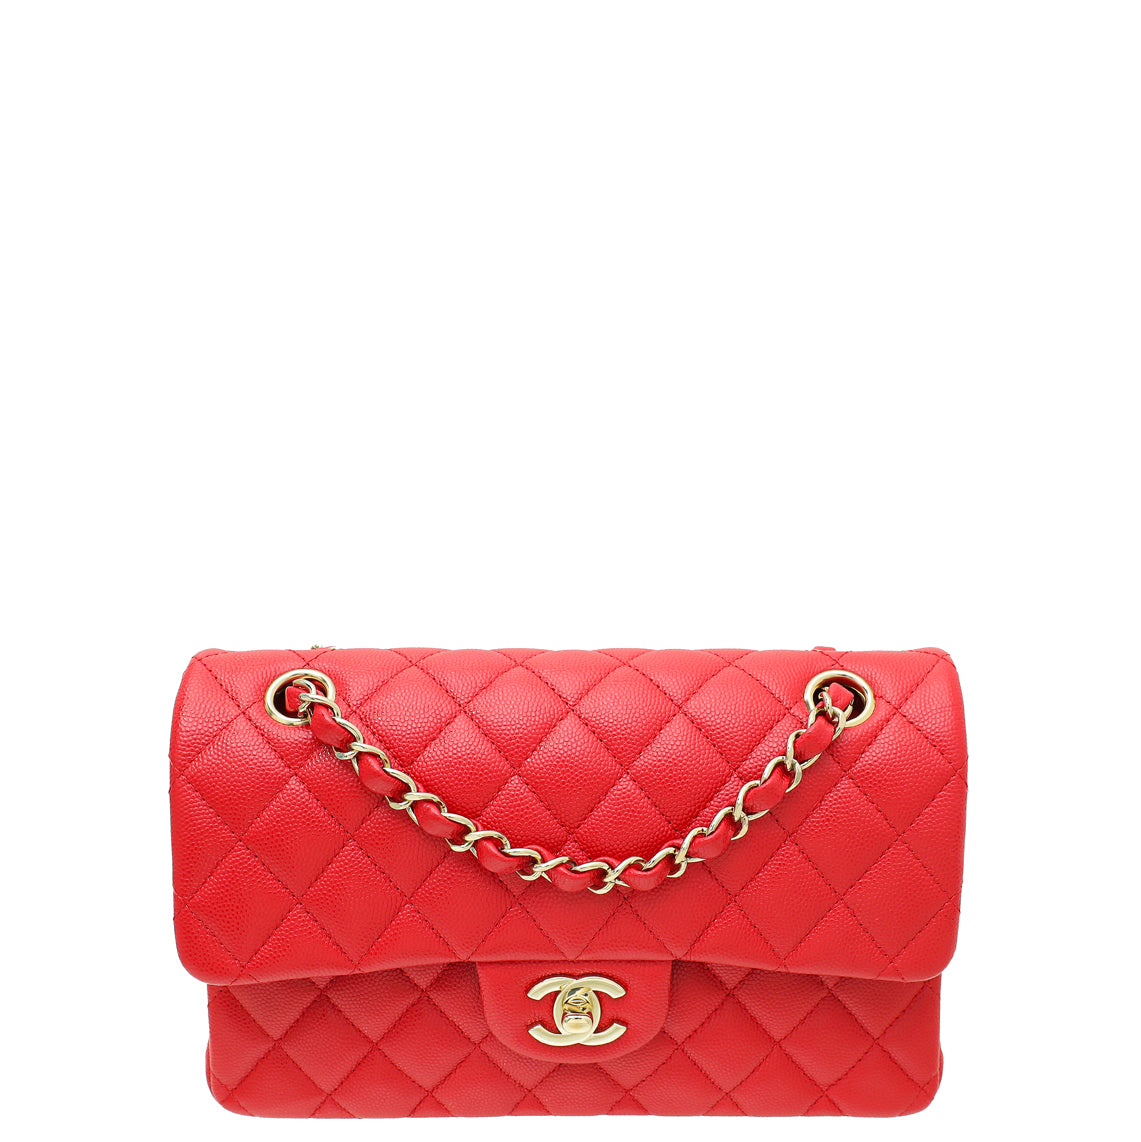 Chanel Red Cc Classic Double Flap Small Bag – The Closet